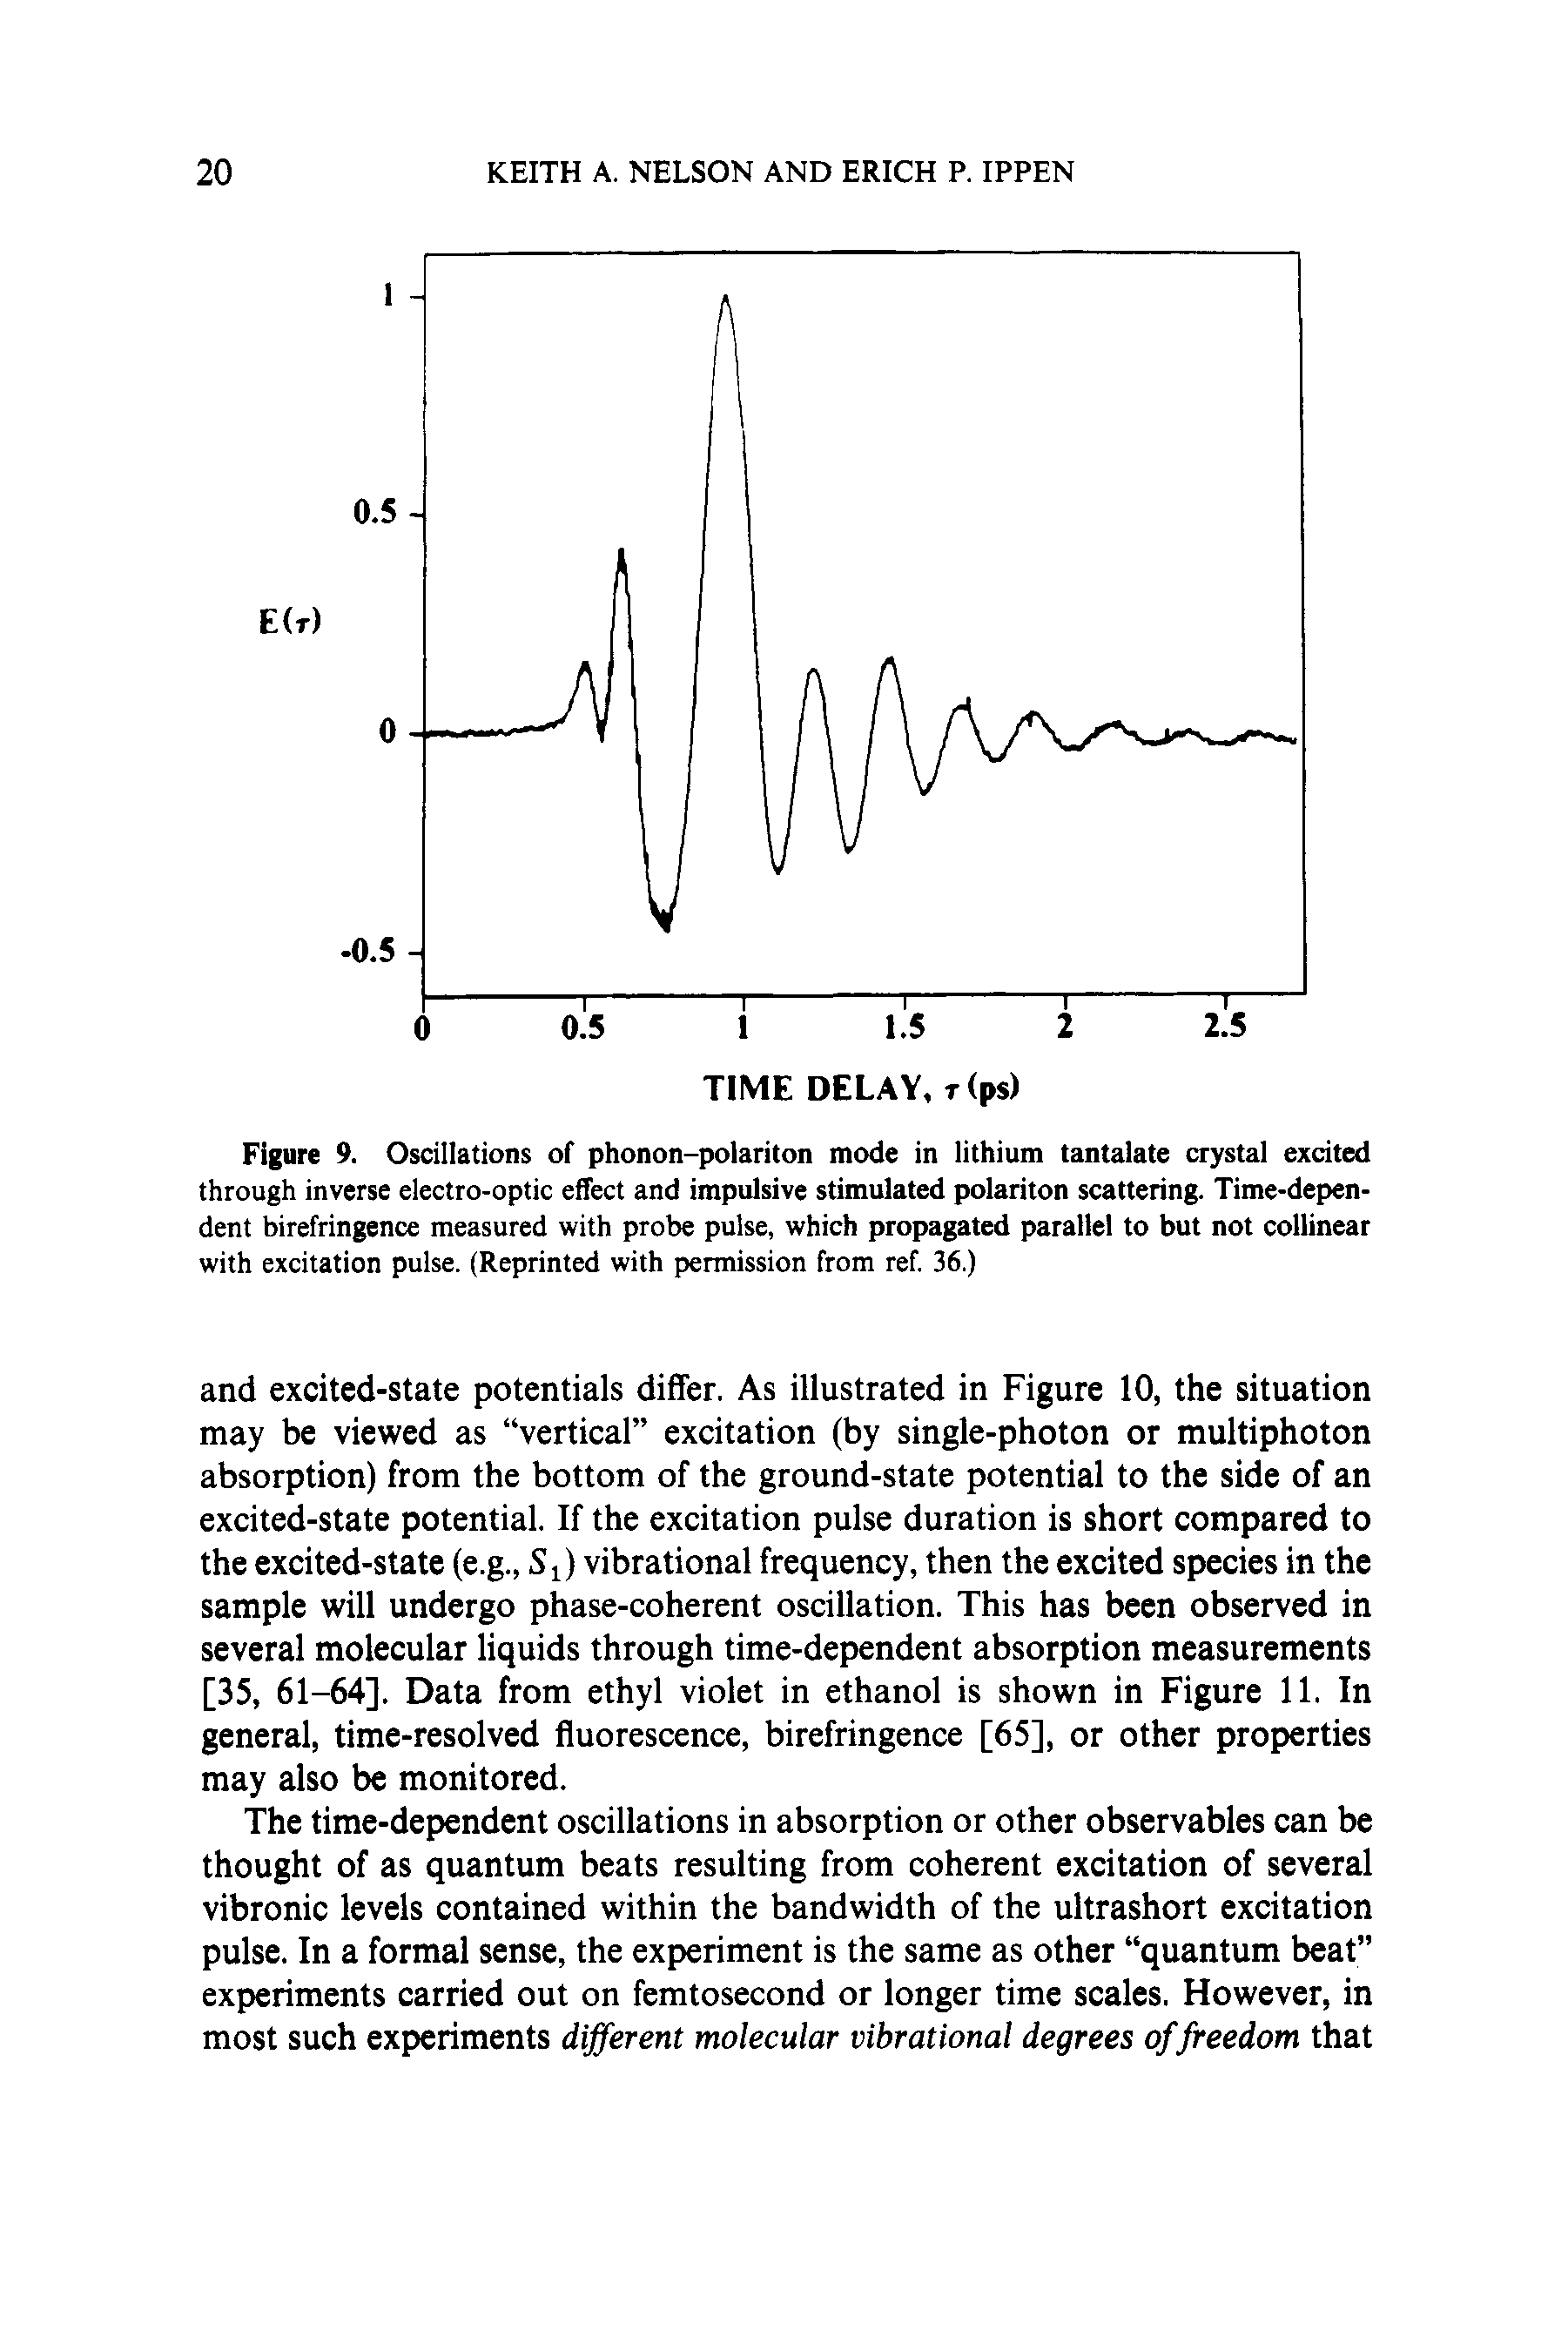 Figure 9. Oscillations of phonon-polariton mode in lithium tantalate crystal excited through inverse electro-optic effect and impulsive stimulated polariton scattering. Time-dependent birefringence measured with probe pulse, which propagated parallel to but not collinear with excitation pulse. (Reprinted with permission from ref. 36.)...